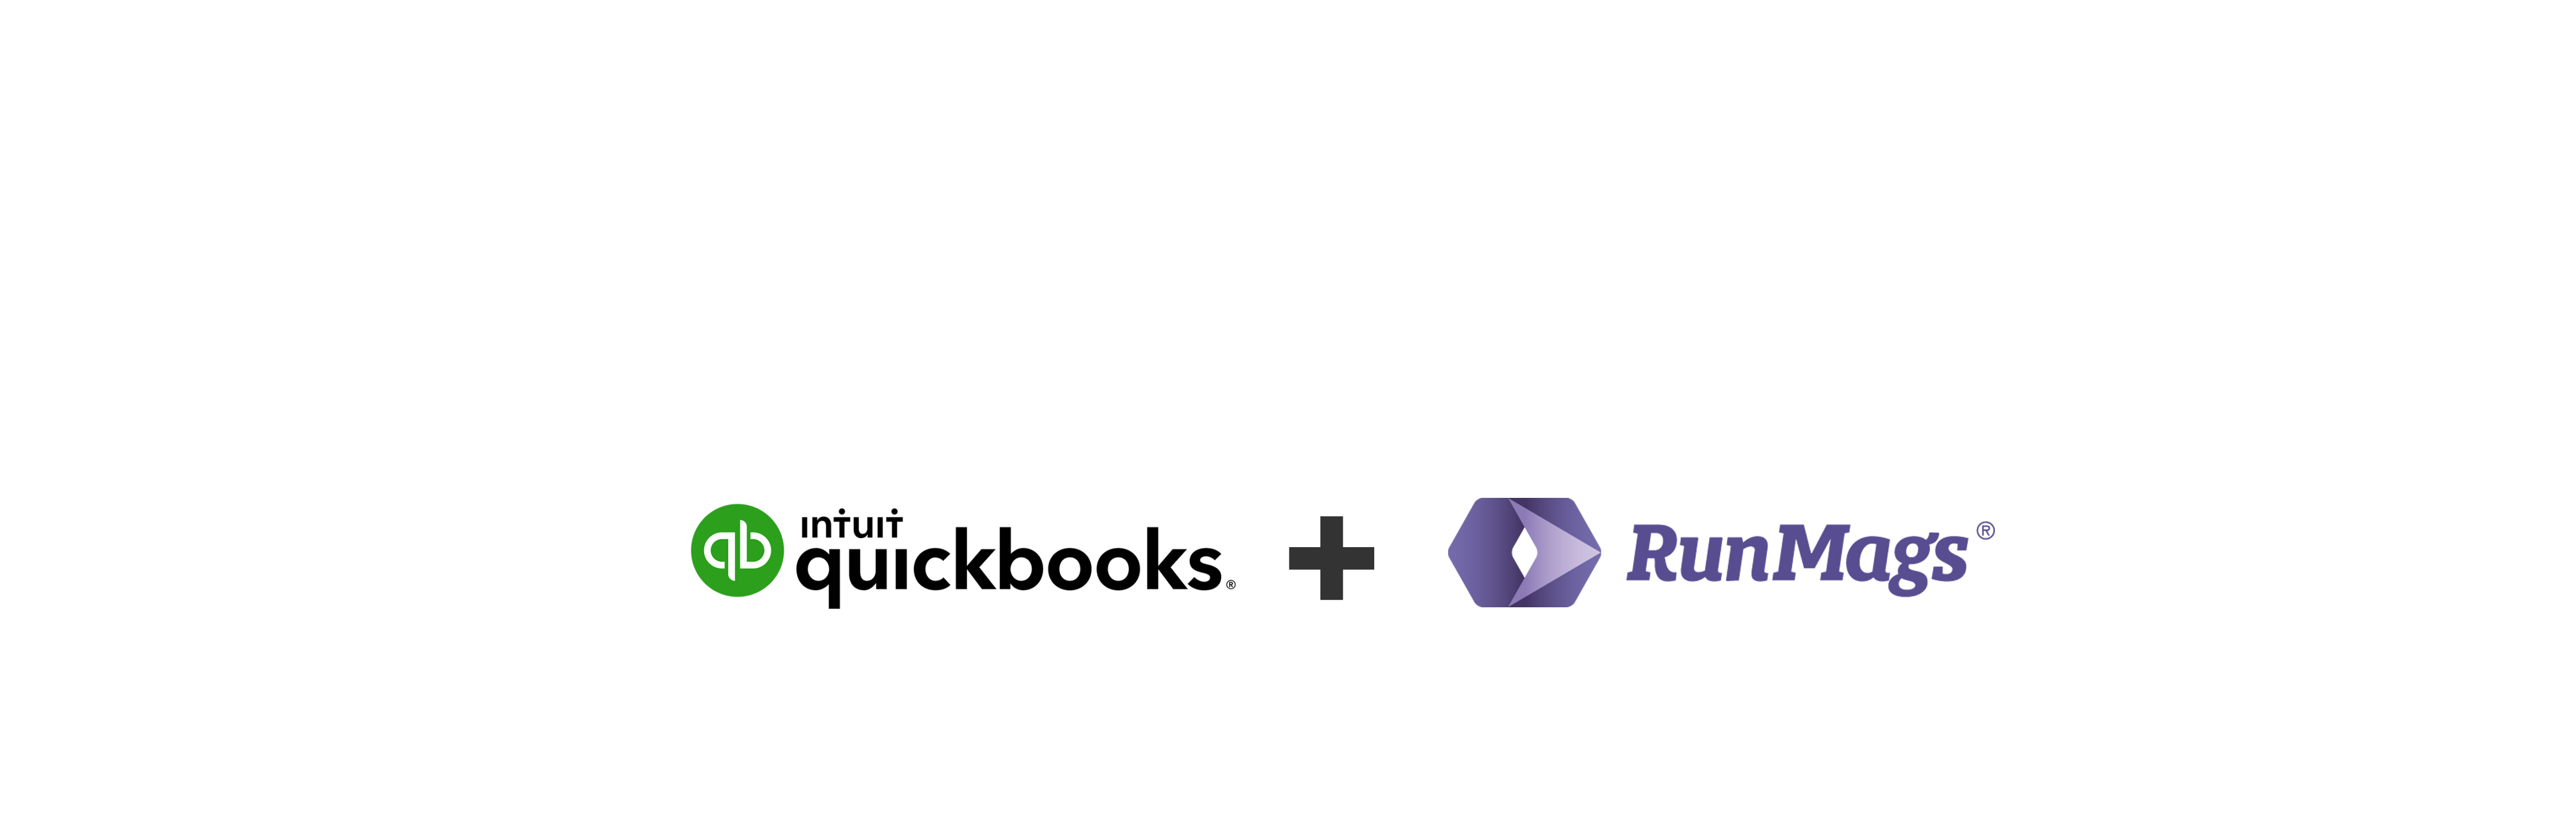 RunMags-Integration-Banner-Quickbooks.png